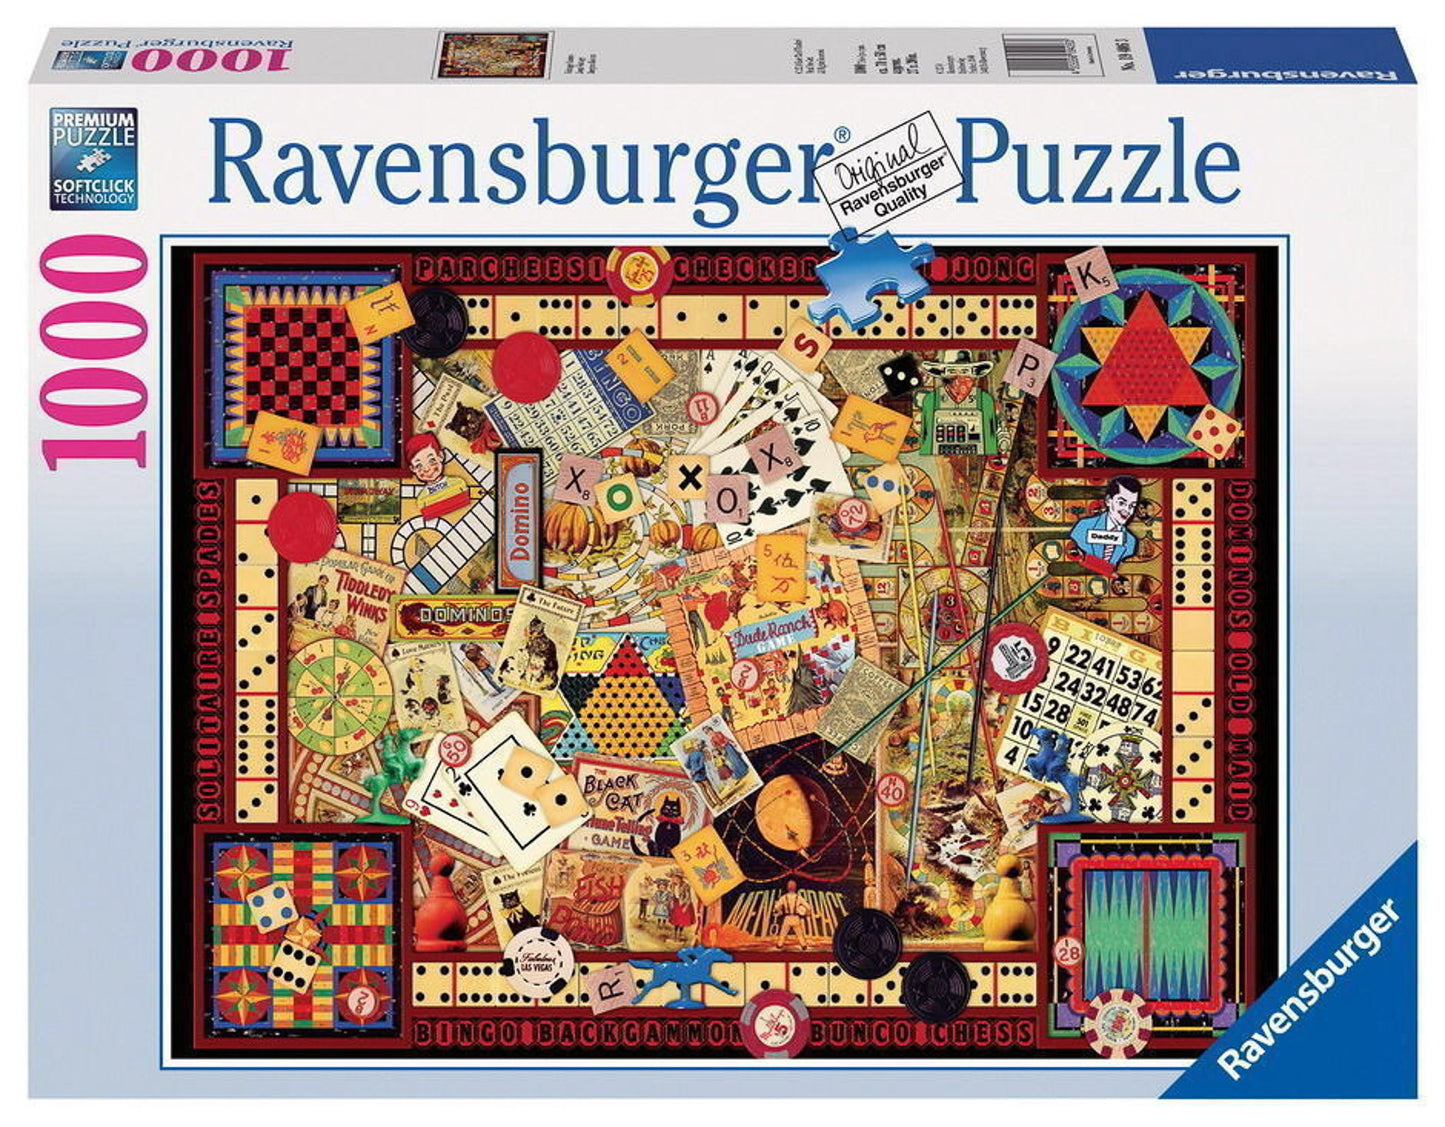 Ravensburger Vintage Games 1000 Piece Jigsaw Puzzle High Quality Buy or Rent